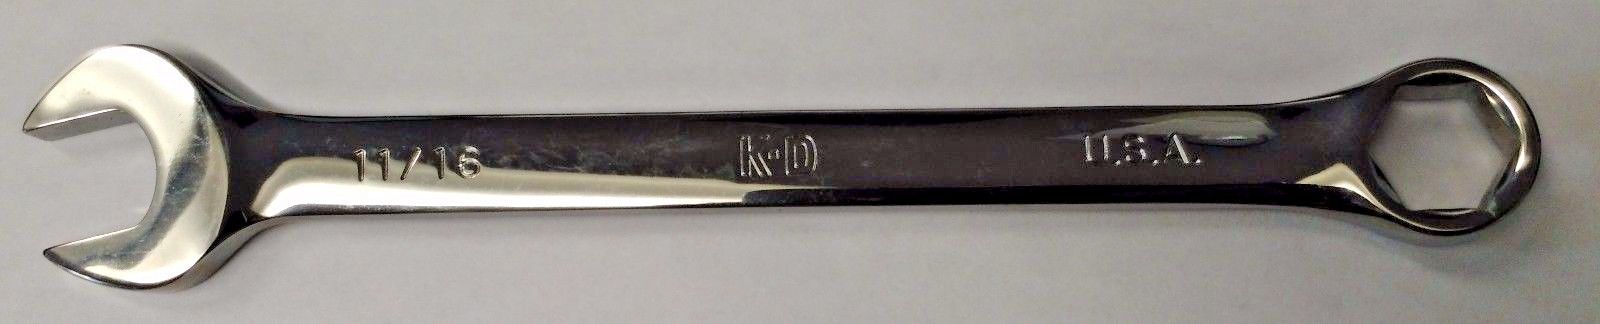 KD Tools 63422 6 Point 11/16 Polish Combination Wrench USA